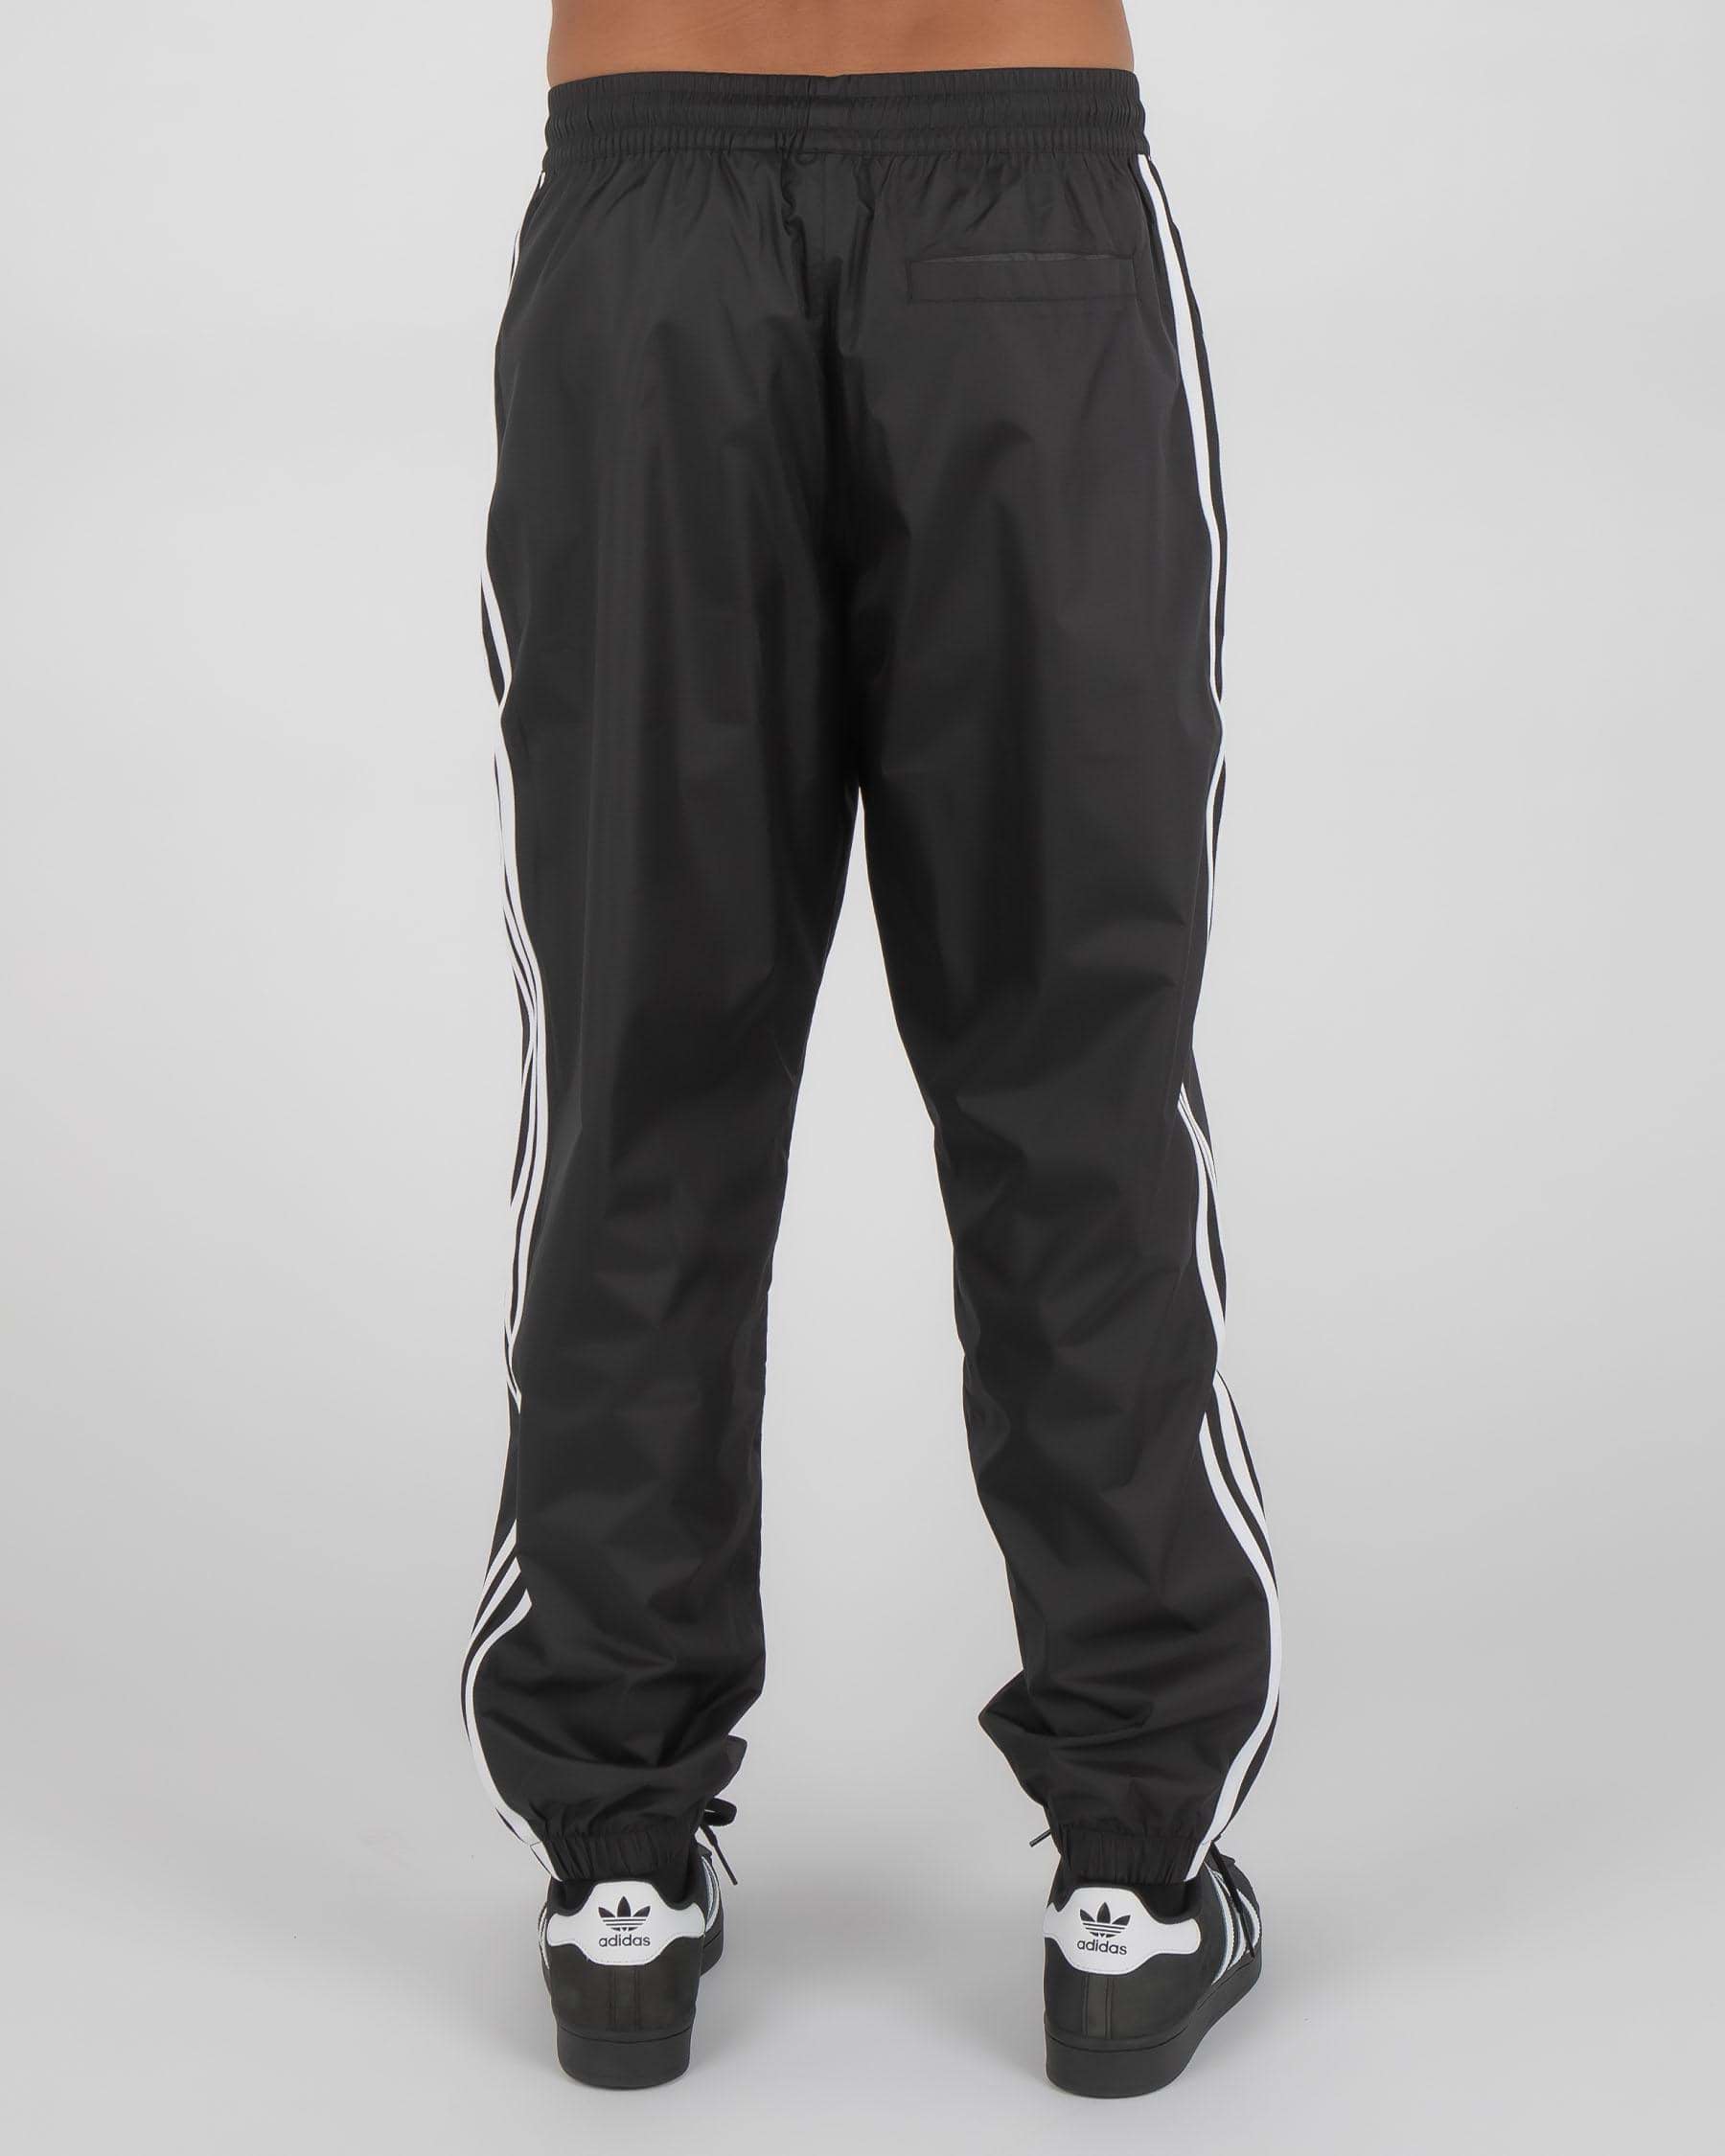 Adidas Superfire Track Pants In Black/white - Fast Shipping & Easy ...